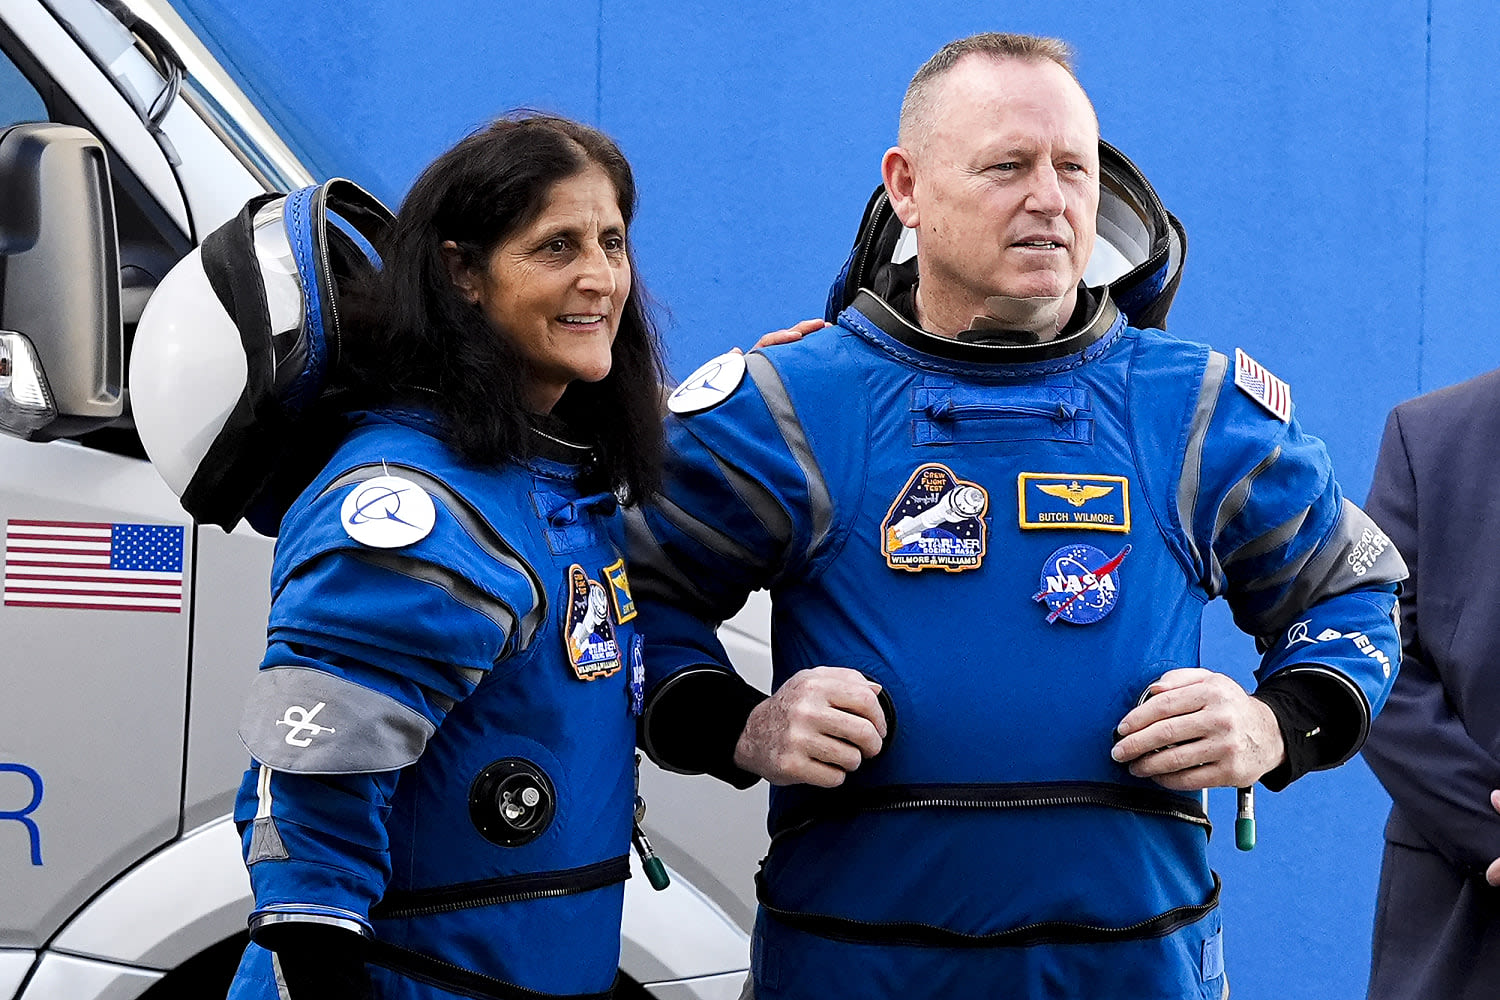 NASA astronauts' return on Boeing's spaceship has been delayed repeatedly